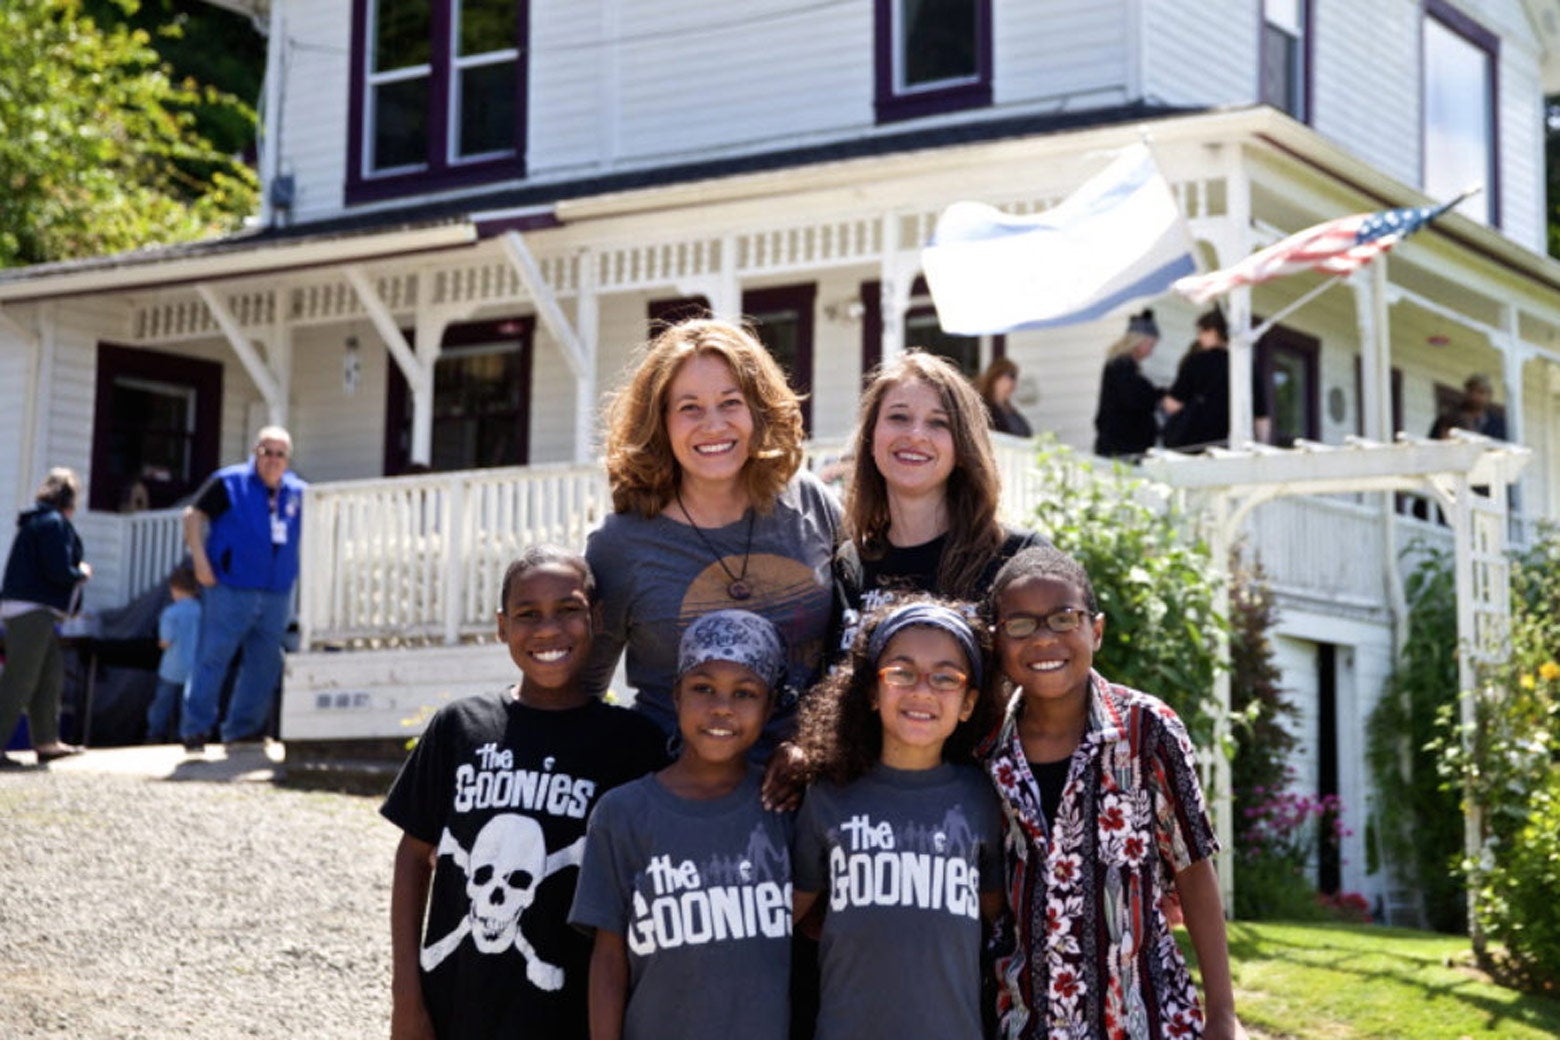 This June 2014 photo shows Devonte Hart with his family at the annual celebration of "The Goonies" movie in Astoria, Ore. 